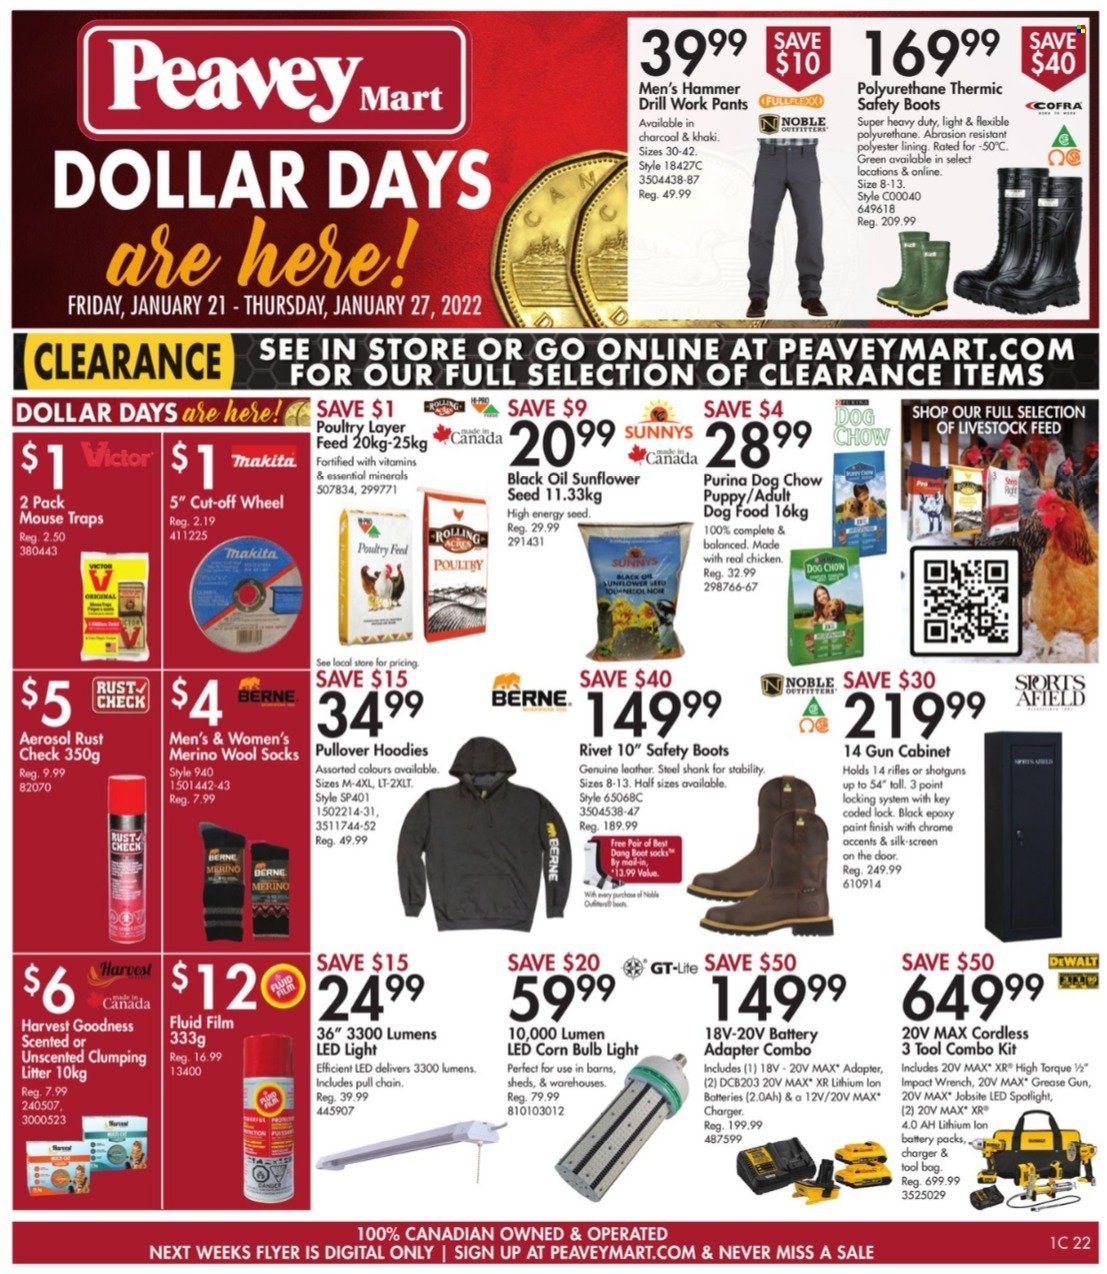 thumbnail - Peavey Mart Flyer - January 21, 2022 - January 27, 2022 - Sales products - mouse trap, bulb, spotlight, cat litter, mouse, hoodie, animal food, dog food, Dog Chow, Purina, plant seeds, Victor, pants, pullover, socks, wool socks, boots, DeWALT, paint, LED light, drill, combo kit, cabinet. Page 1.